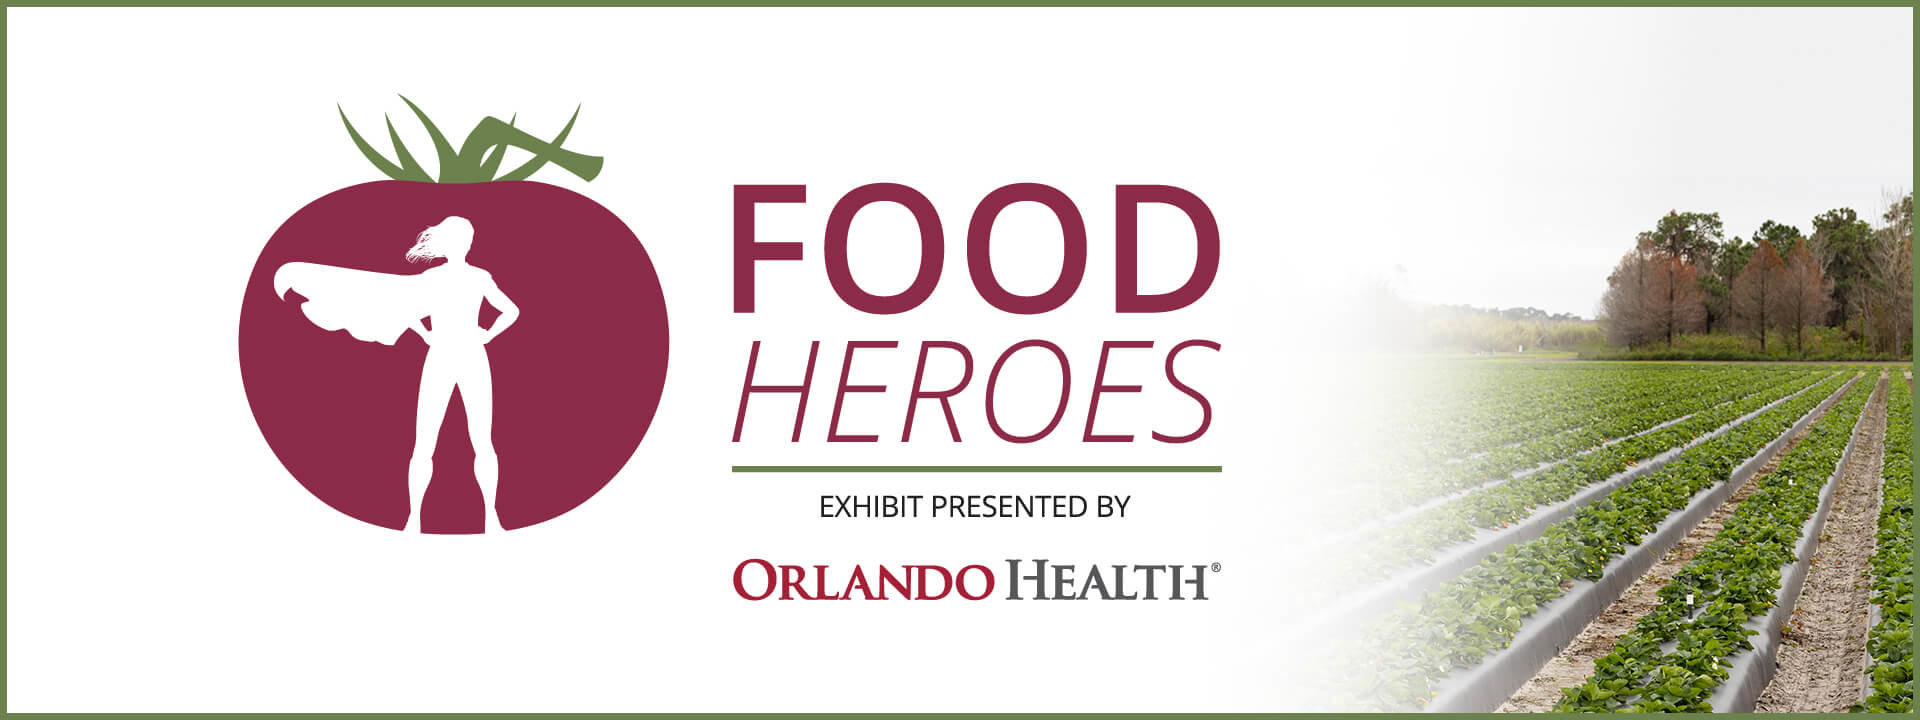 Food Heroes Exhibit Presented by Orlando Health - logo of superhero outline within tomato silhouette and photo background of strawberry field.